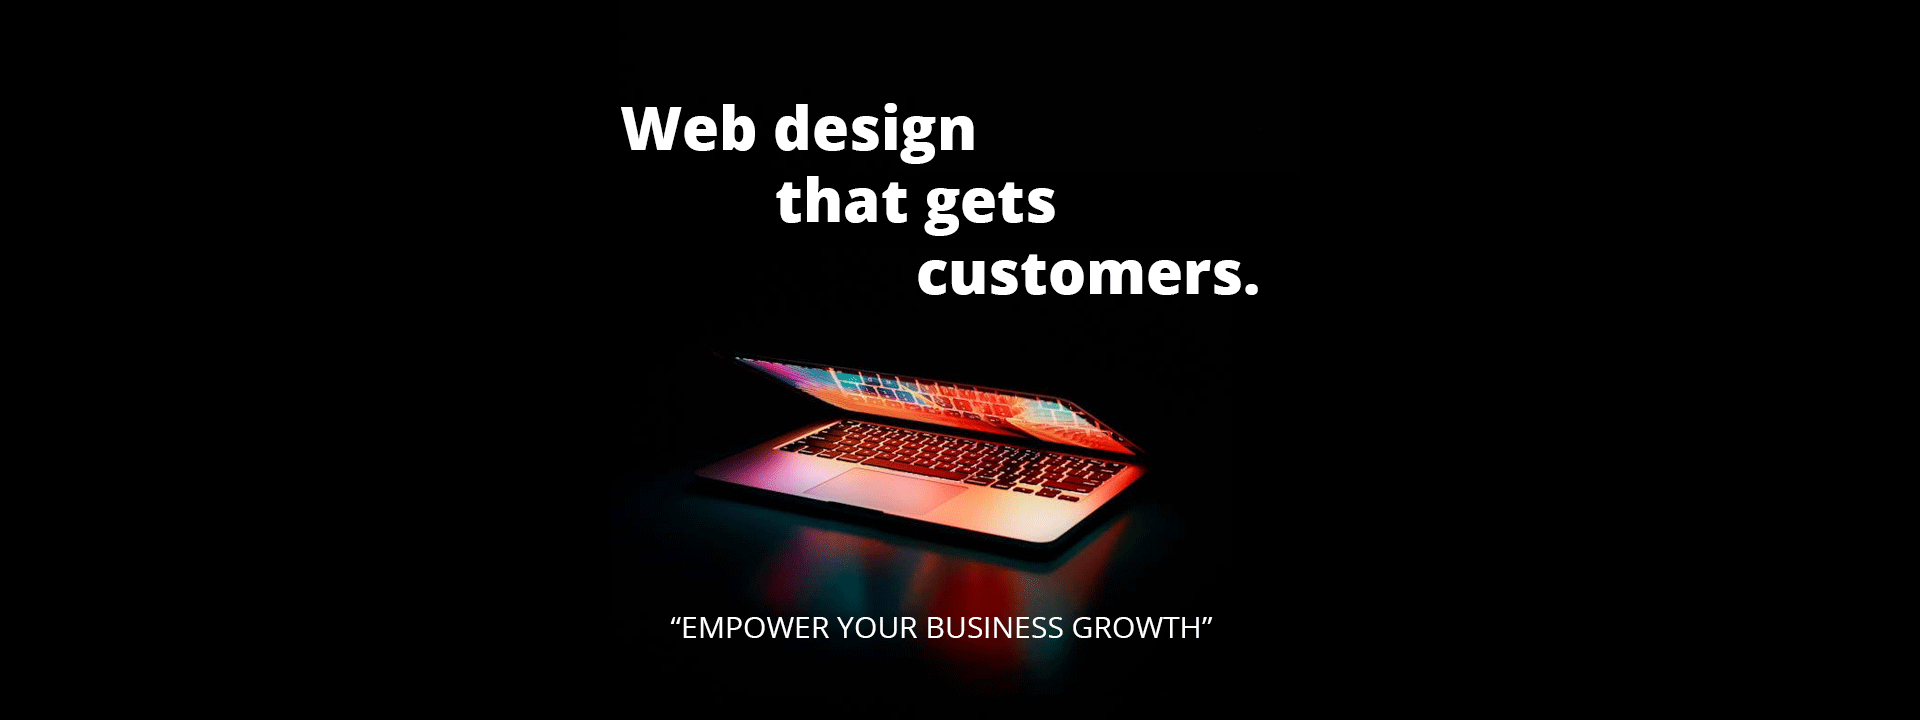 Web design that gets customers.